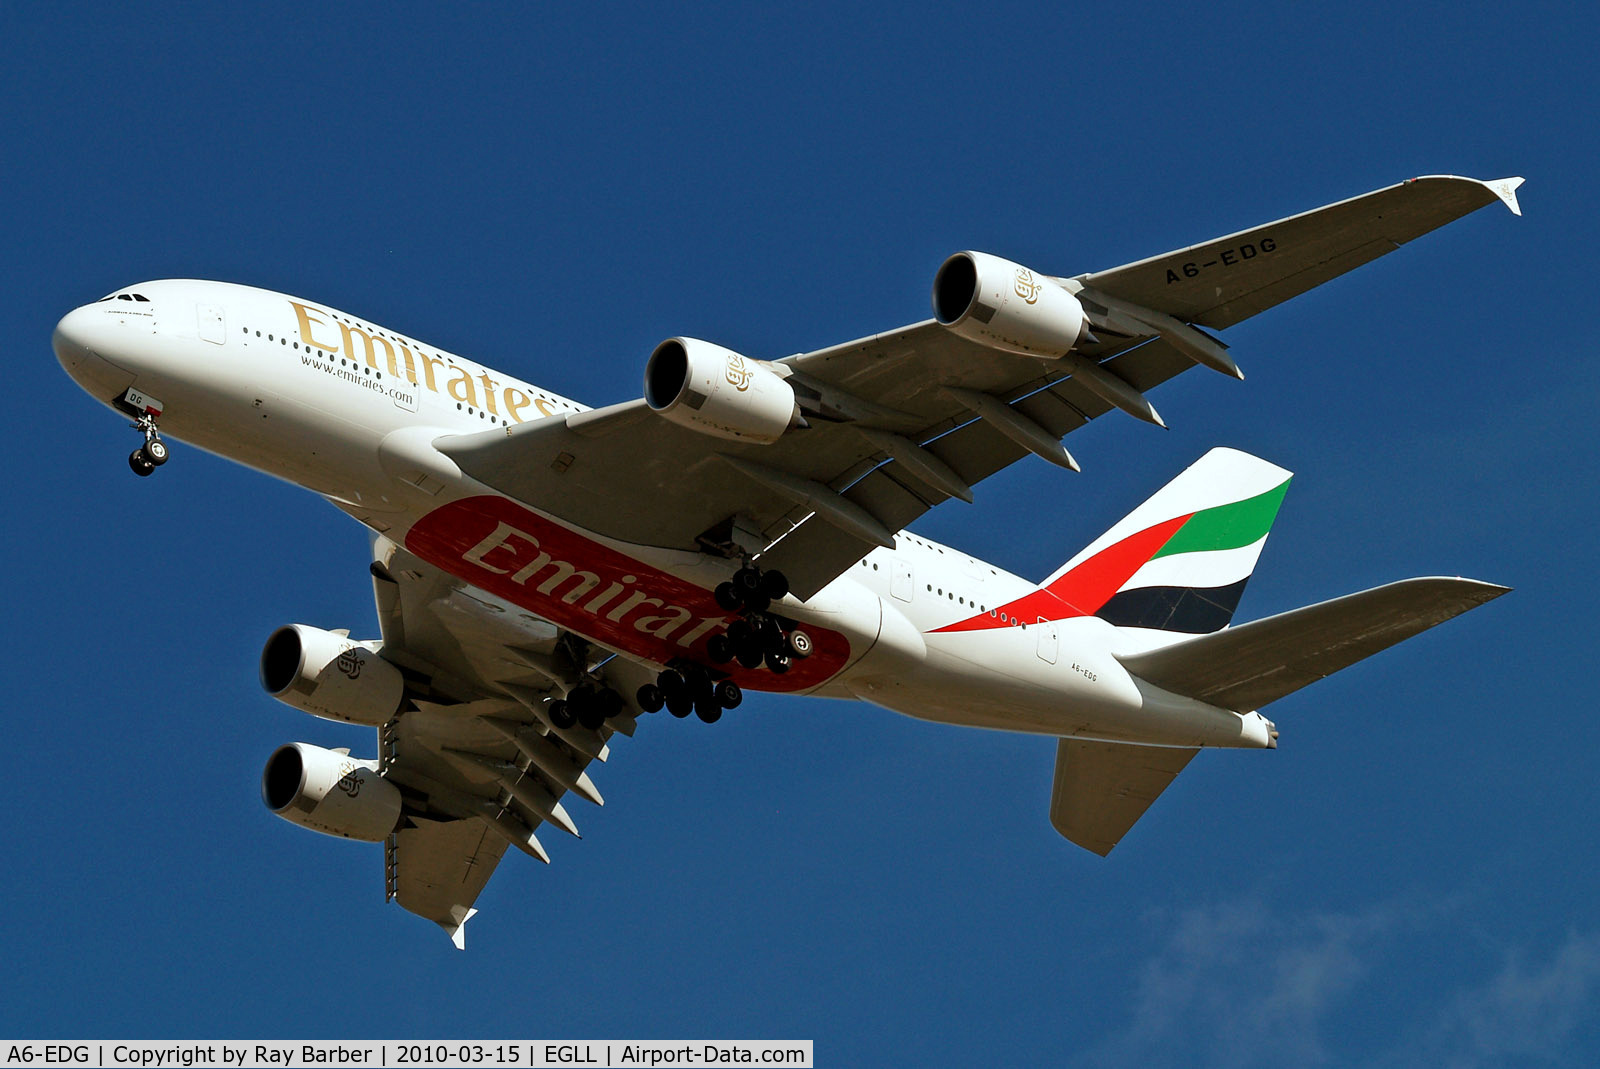 A6-EDG, 2009 Airbus A380-861 C/N 023, A6-EDG   Airbus A380-861 [023] (Emirates Airlines) Home~G 15/03/2010. On approach 27R.